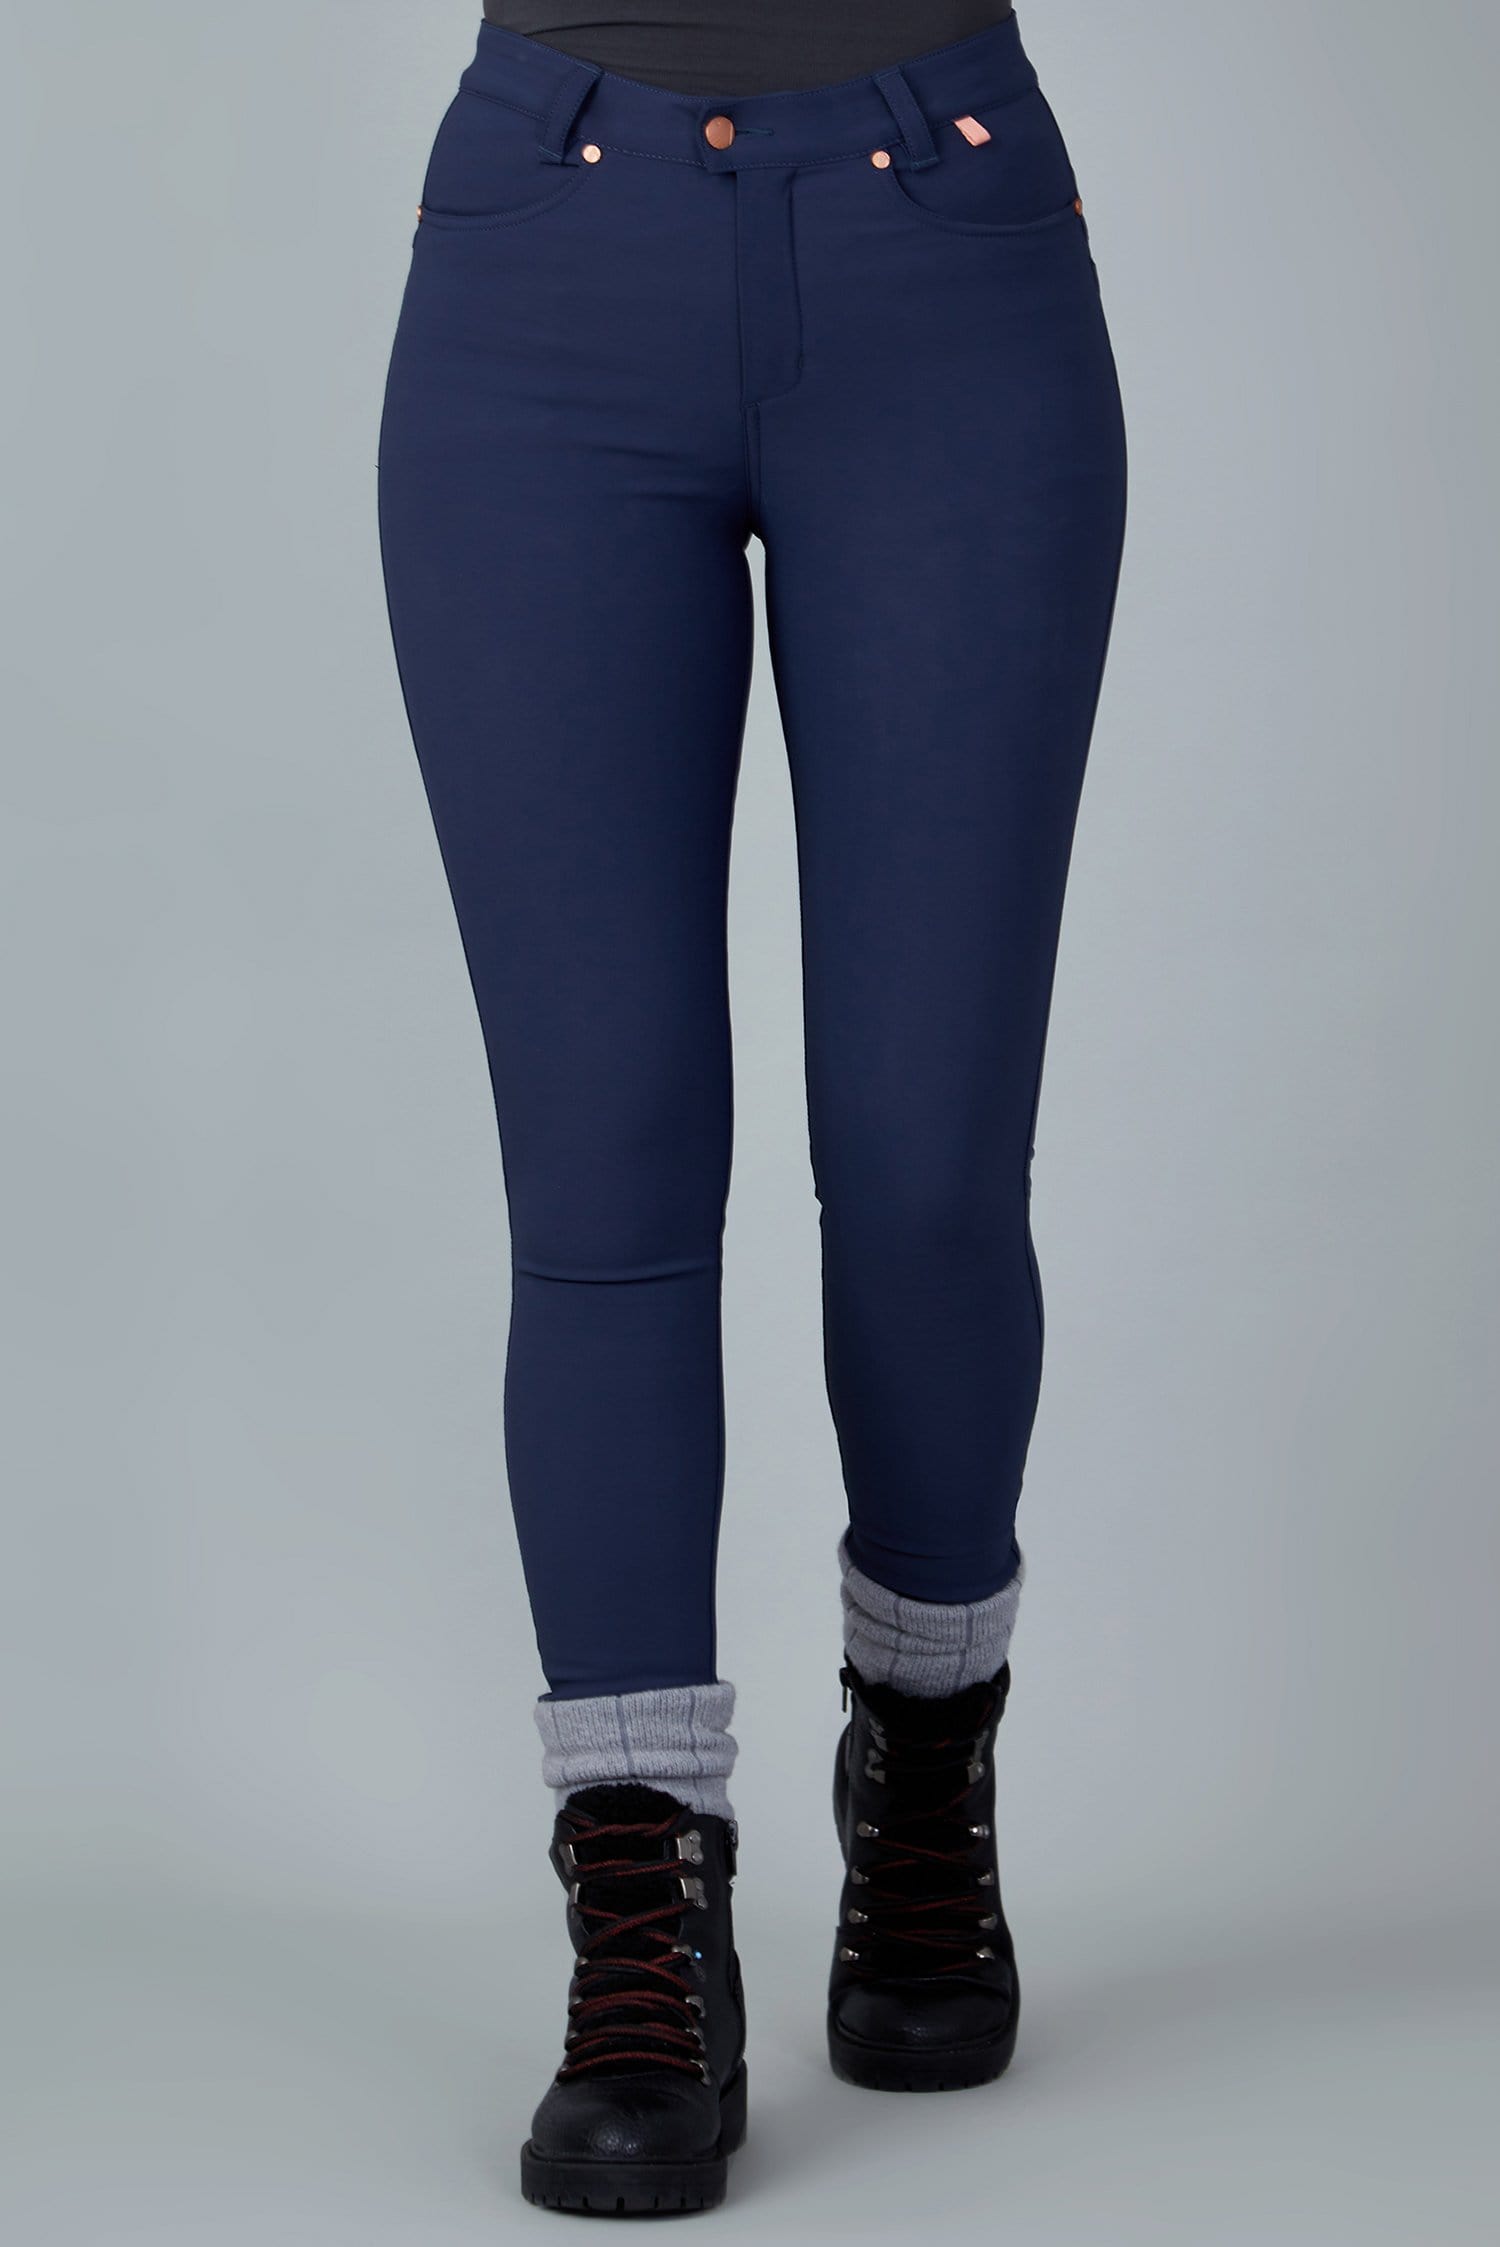 The Aventurite Stretch Skinny Outdoor Trousers - Midnight Blue - 32r / Uk14 - Womens - Acai Outdoorwear